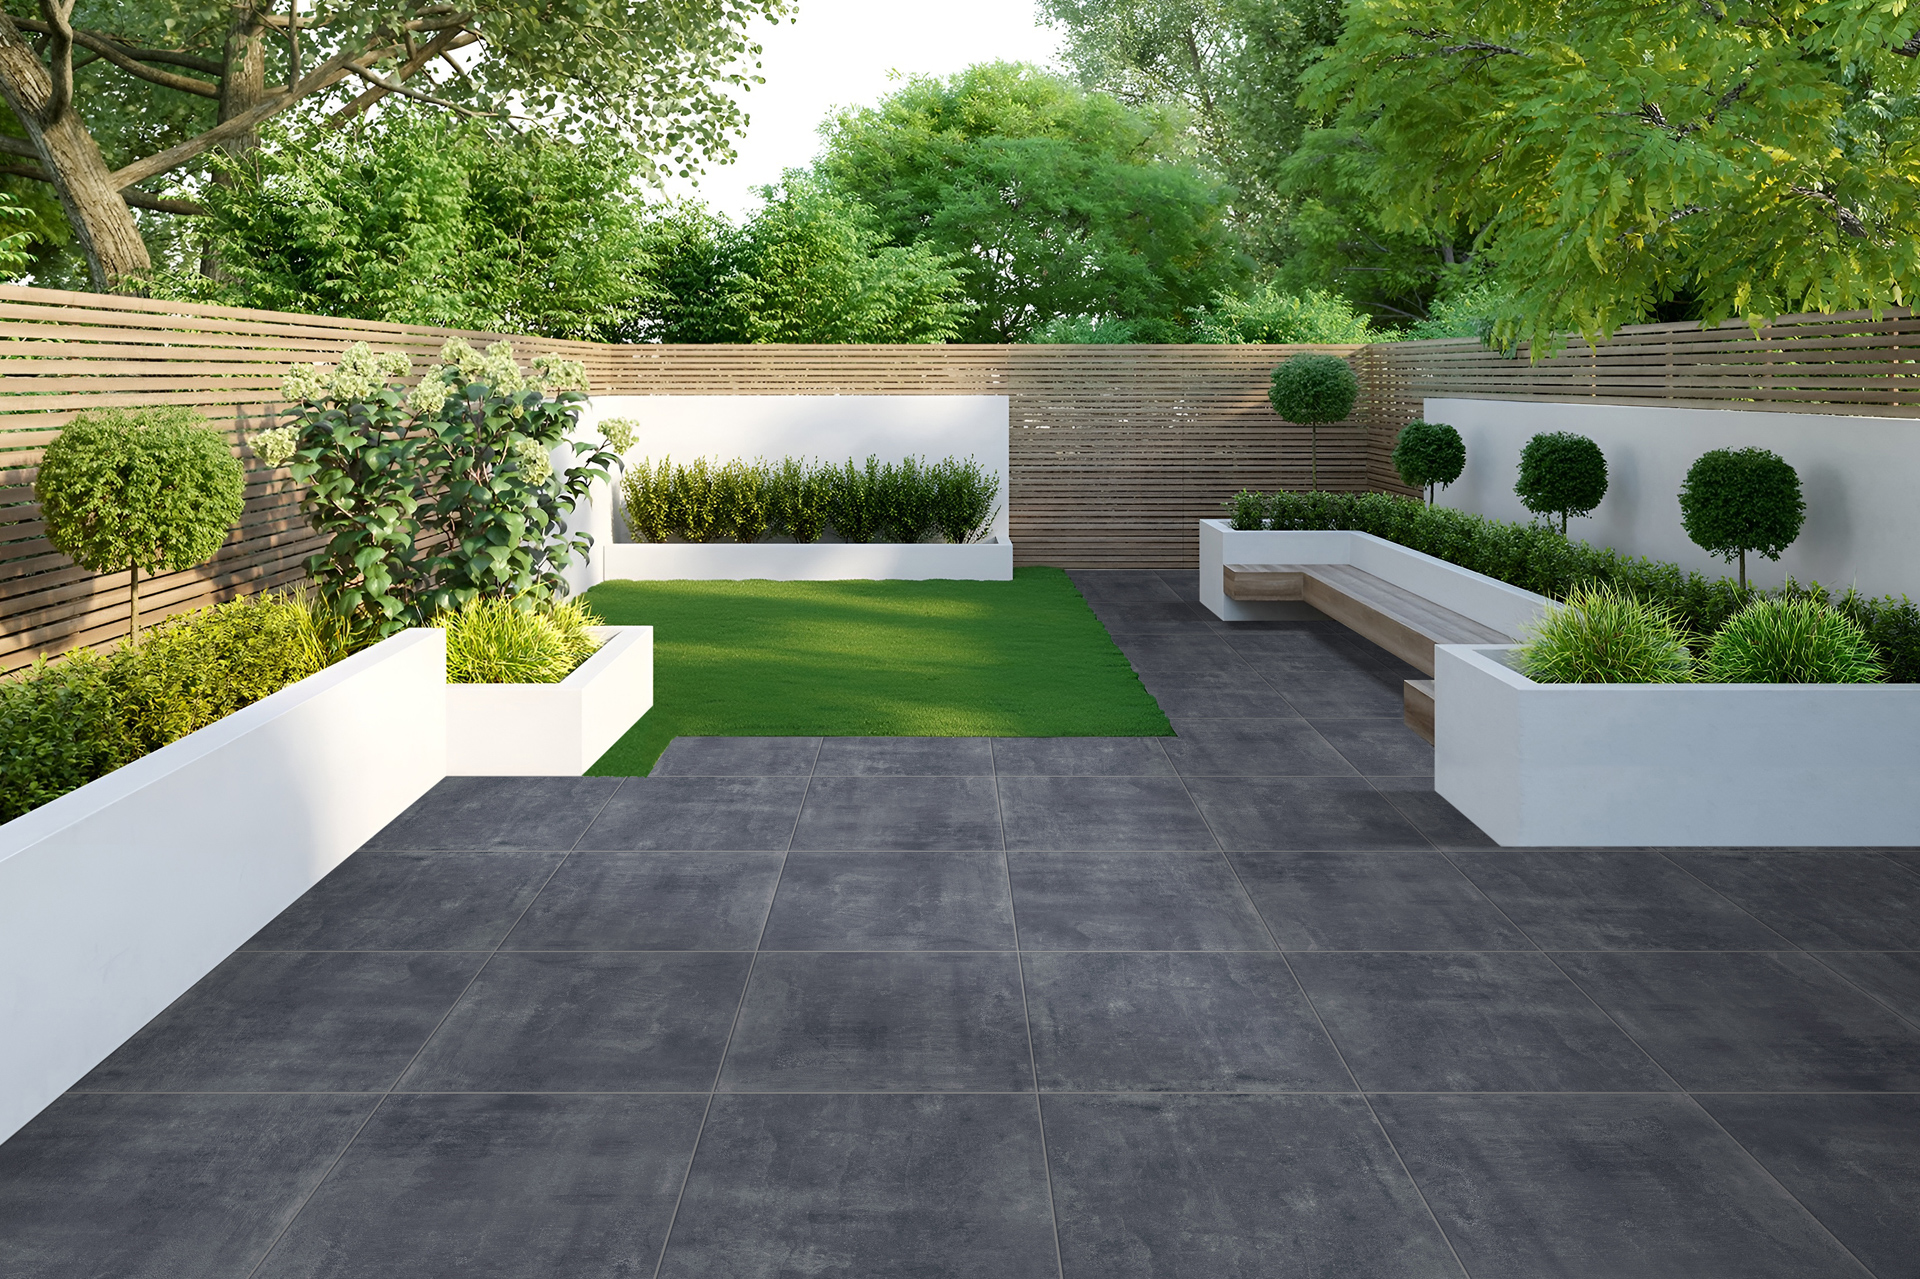 Transform your space with the <br />
timeless elegance of Outdoor Tiles